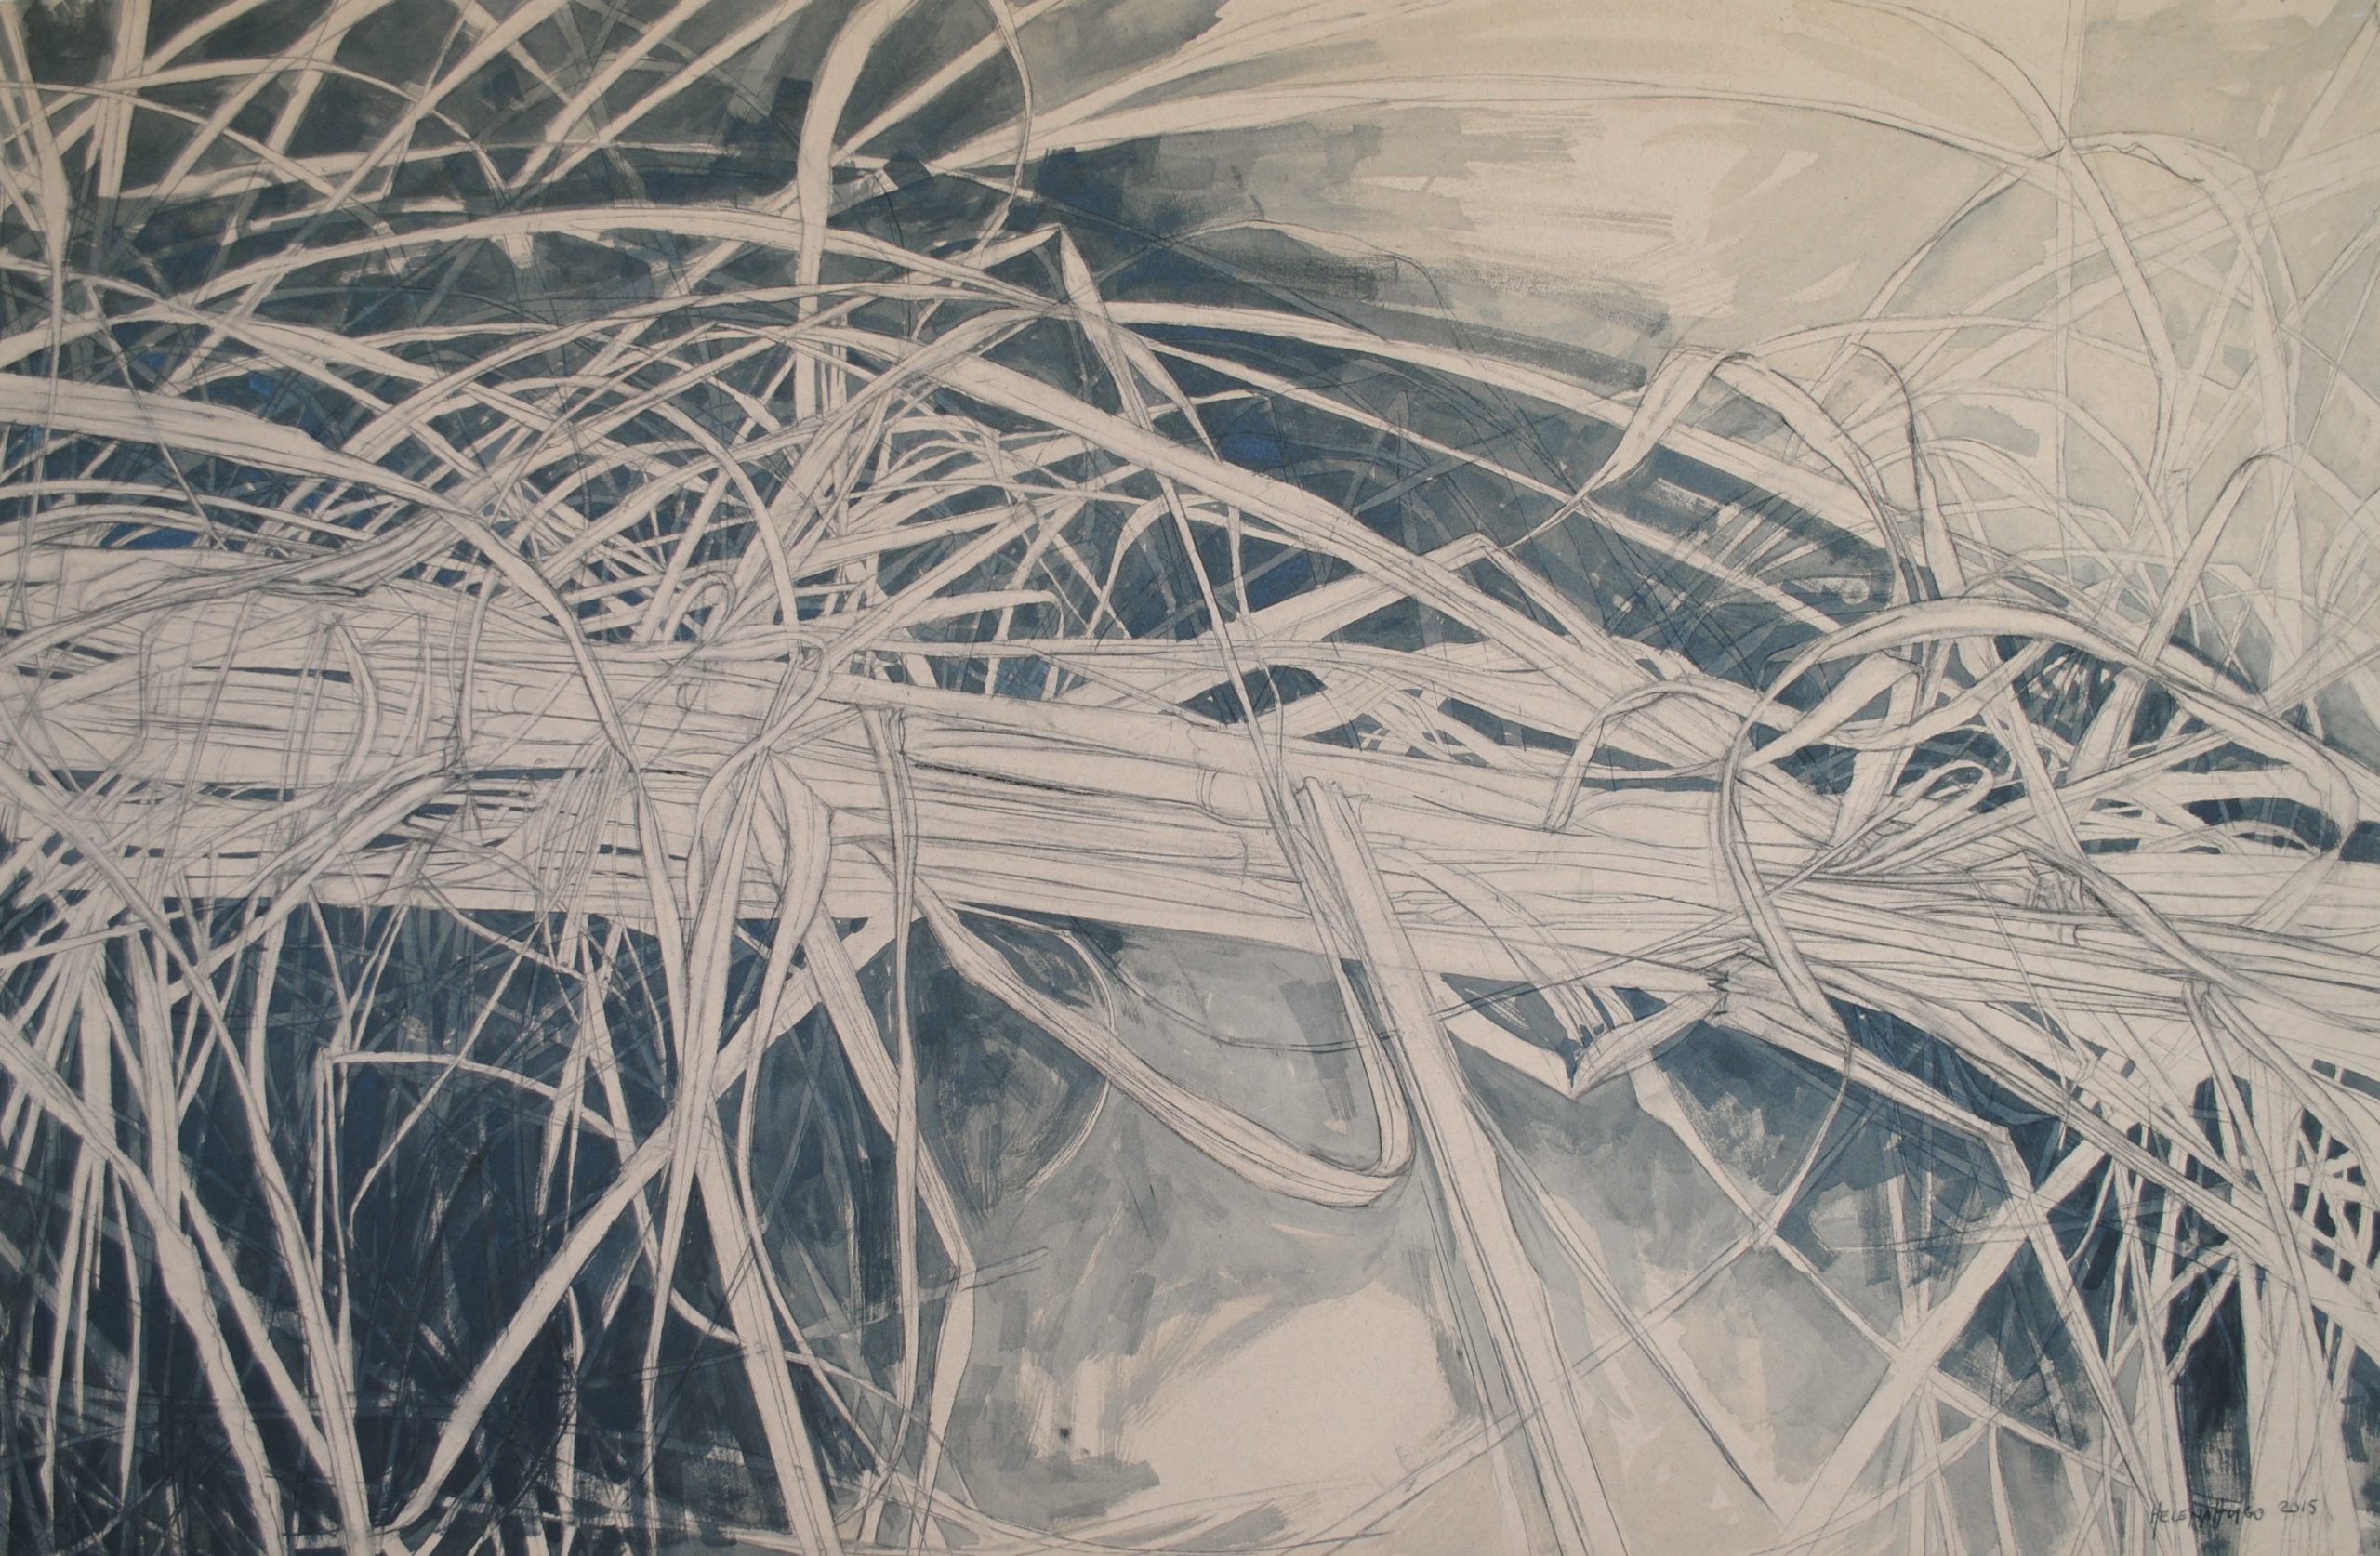 Man is like Grass I

80cm x 122cm

Charcoal and ink on board